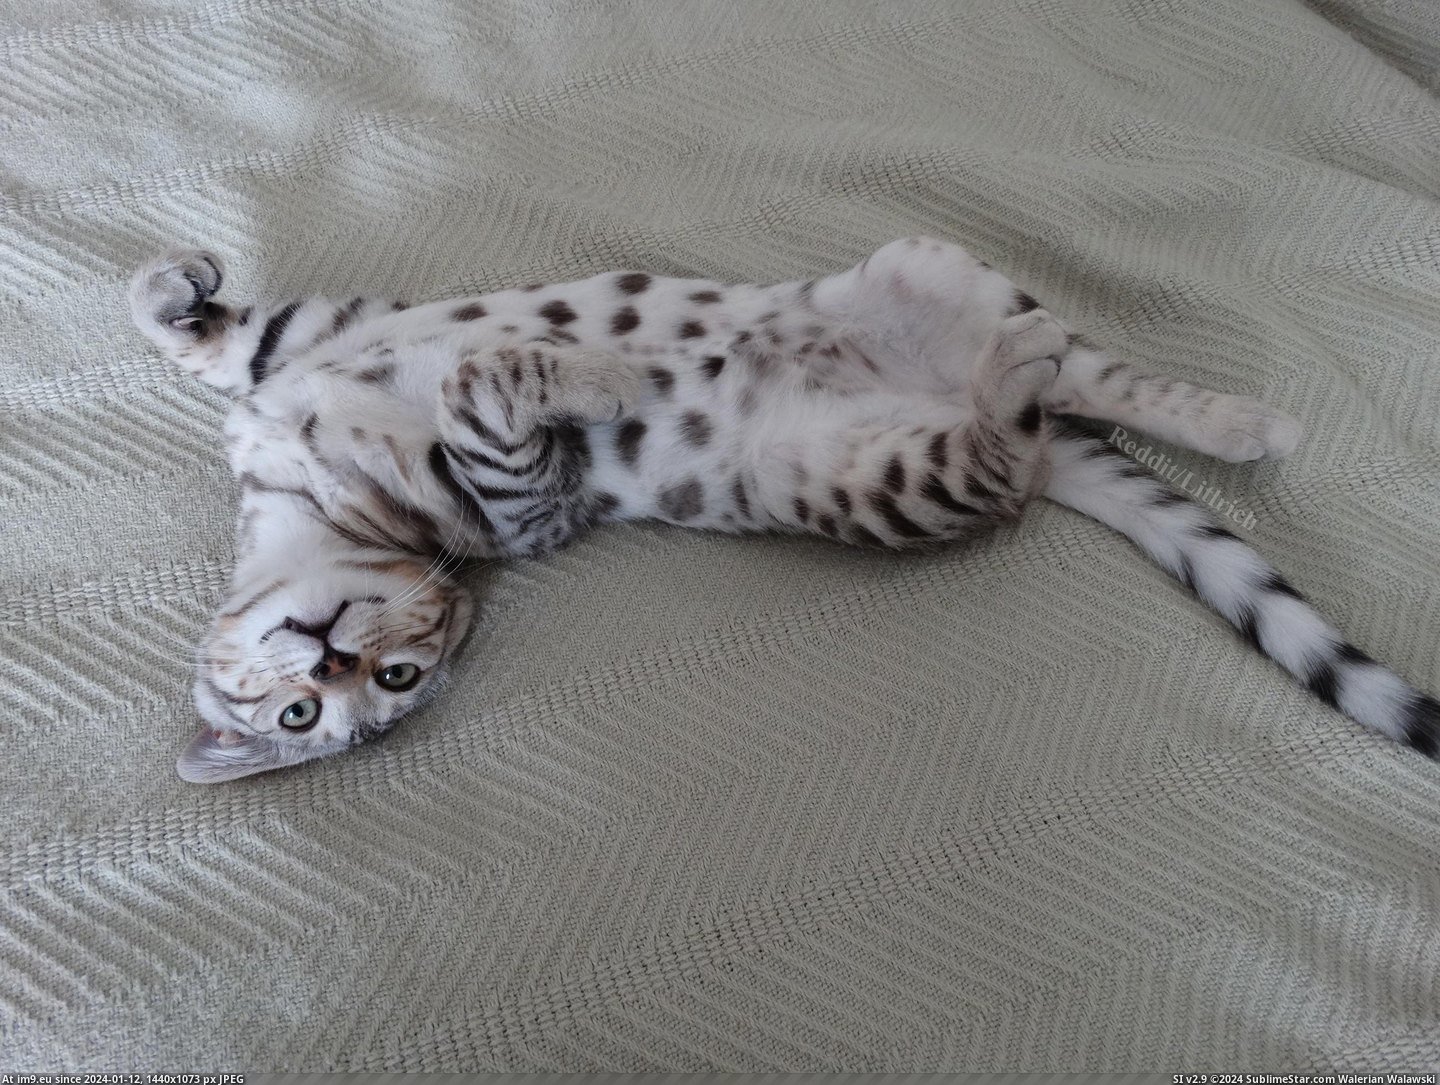 #Time #Kitten #Rub #Decided #Belly [Aww] I just got home to see my kitten has already decided it's time for a belly rub Pic. (Изображение из альбом My r/AWW favs))